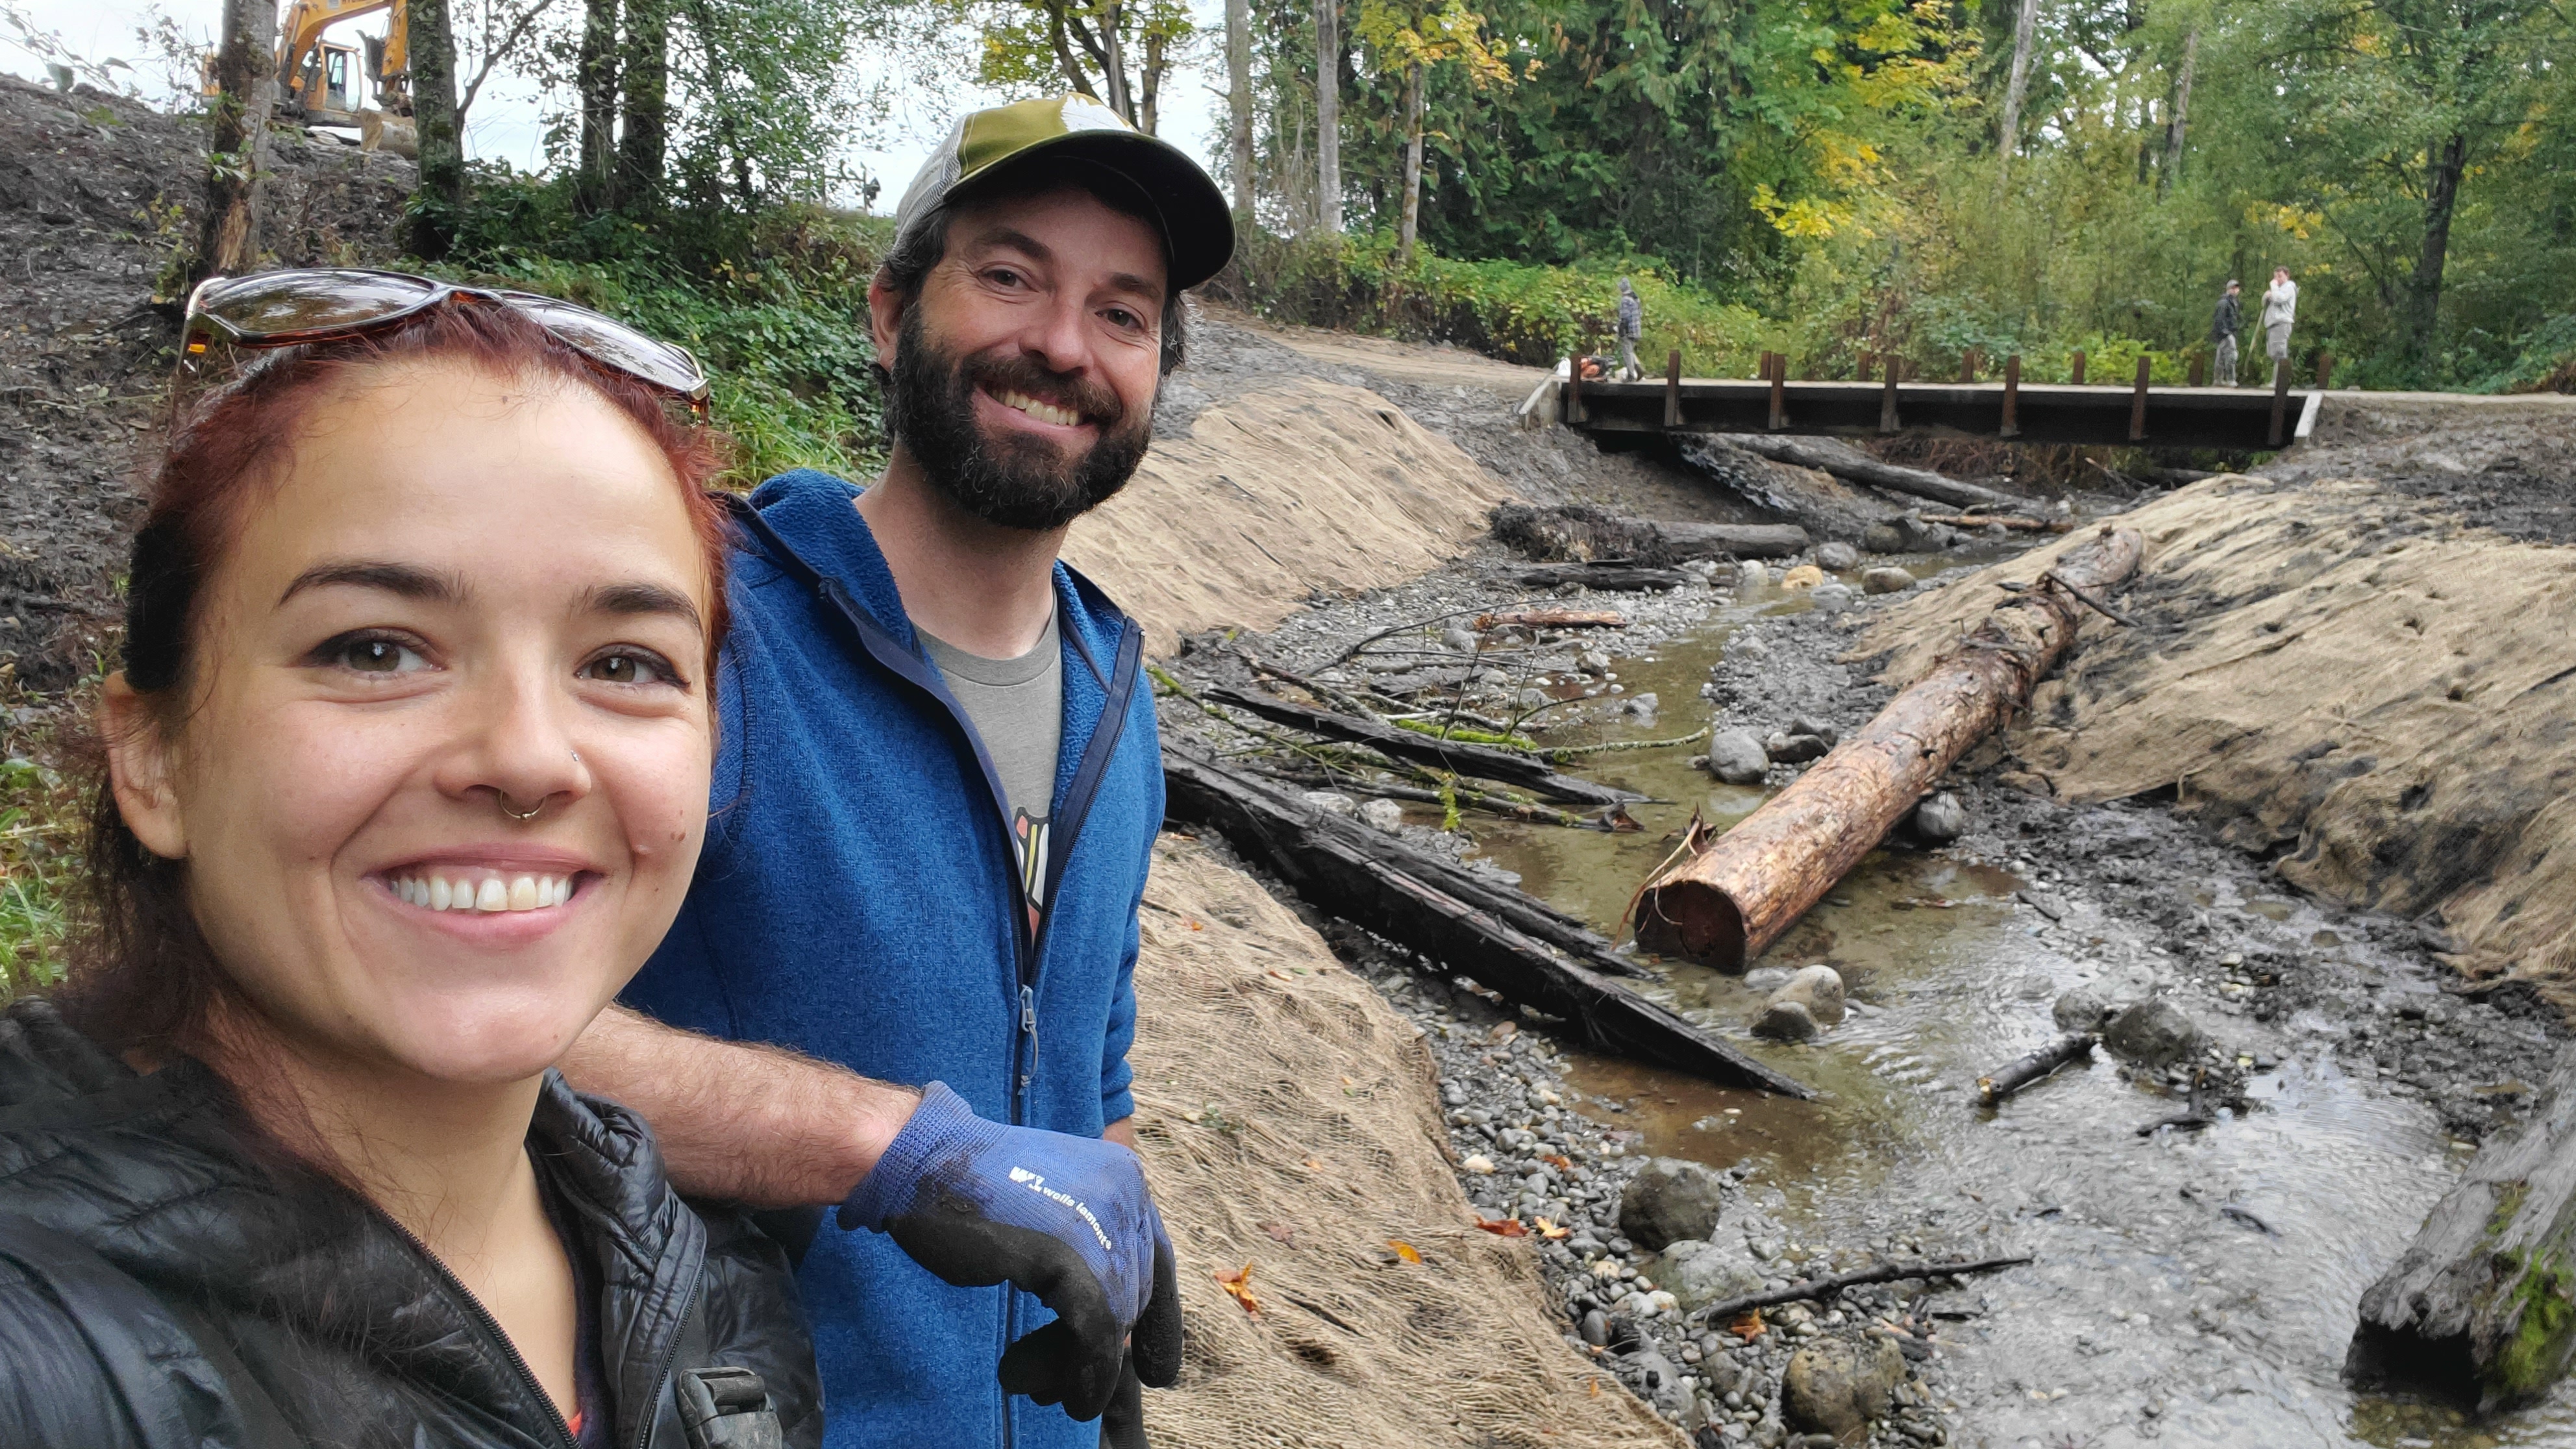 Restoration Acquisition And Stewardship Program - Two people in waterway